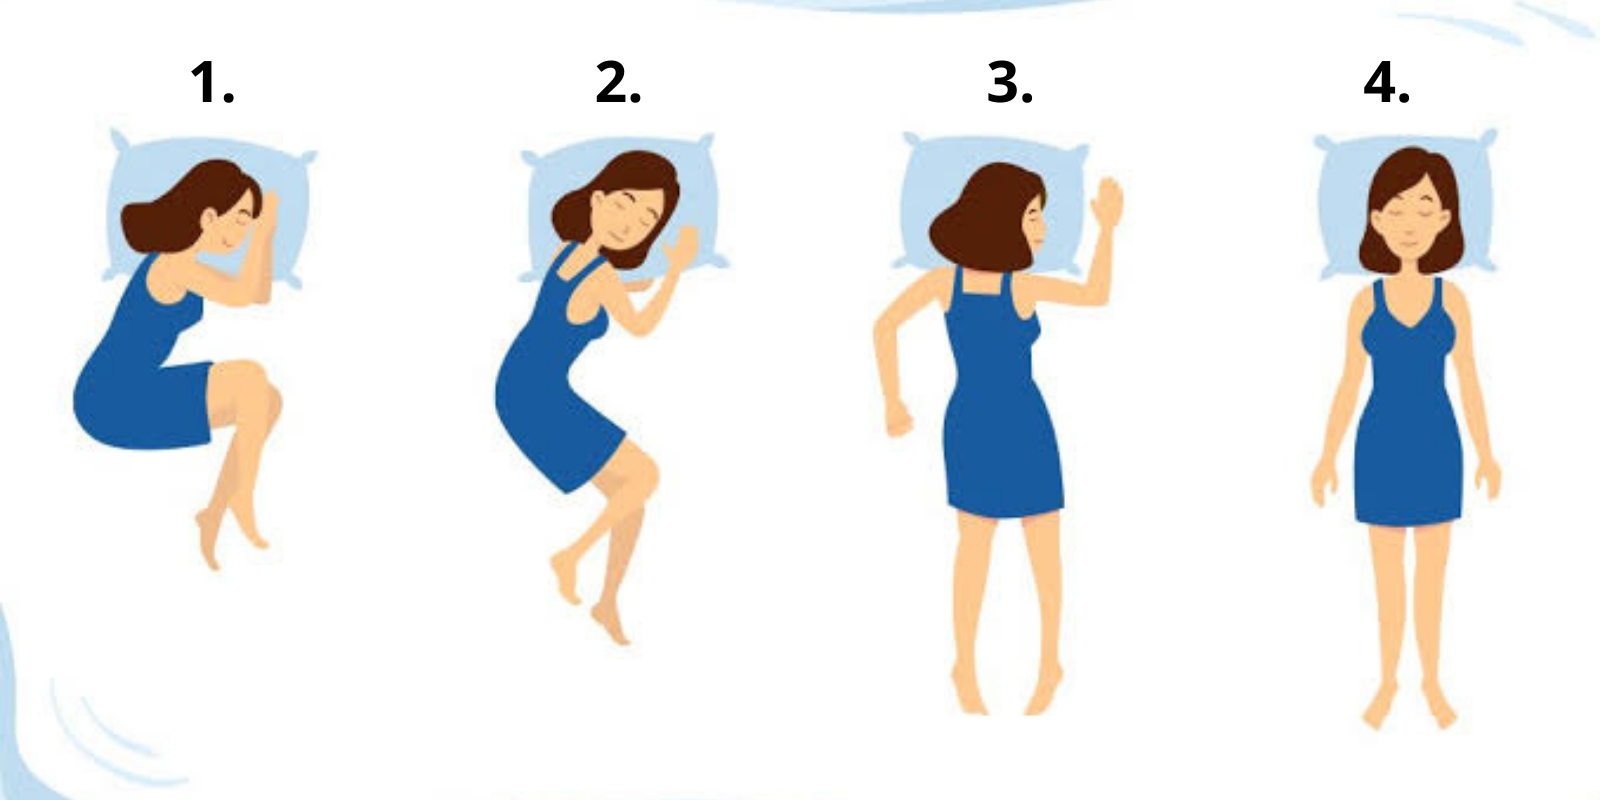 Pick a sleeping position